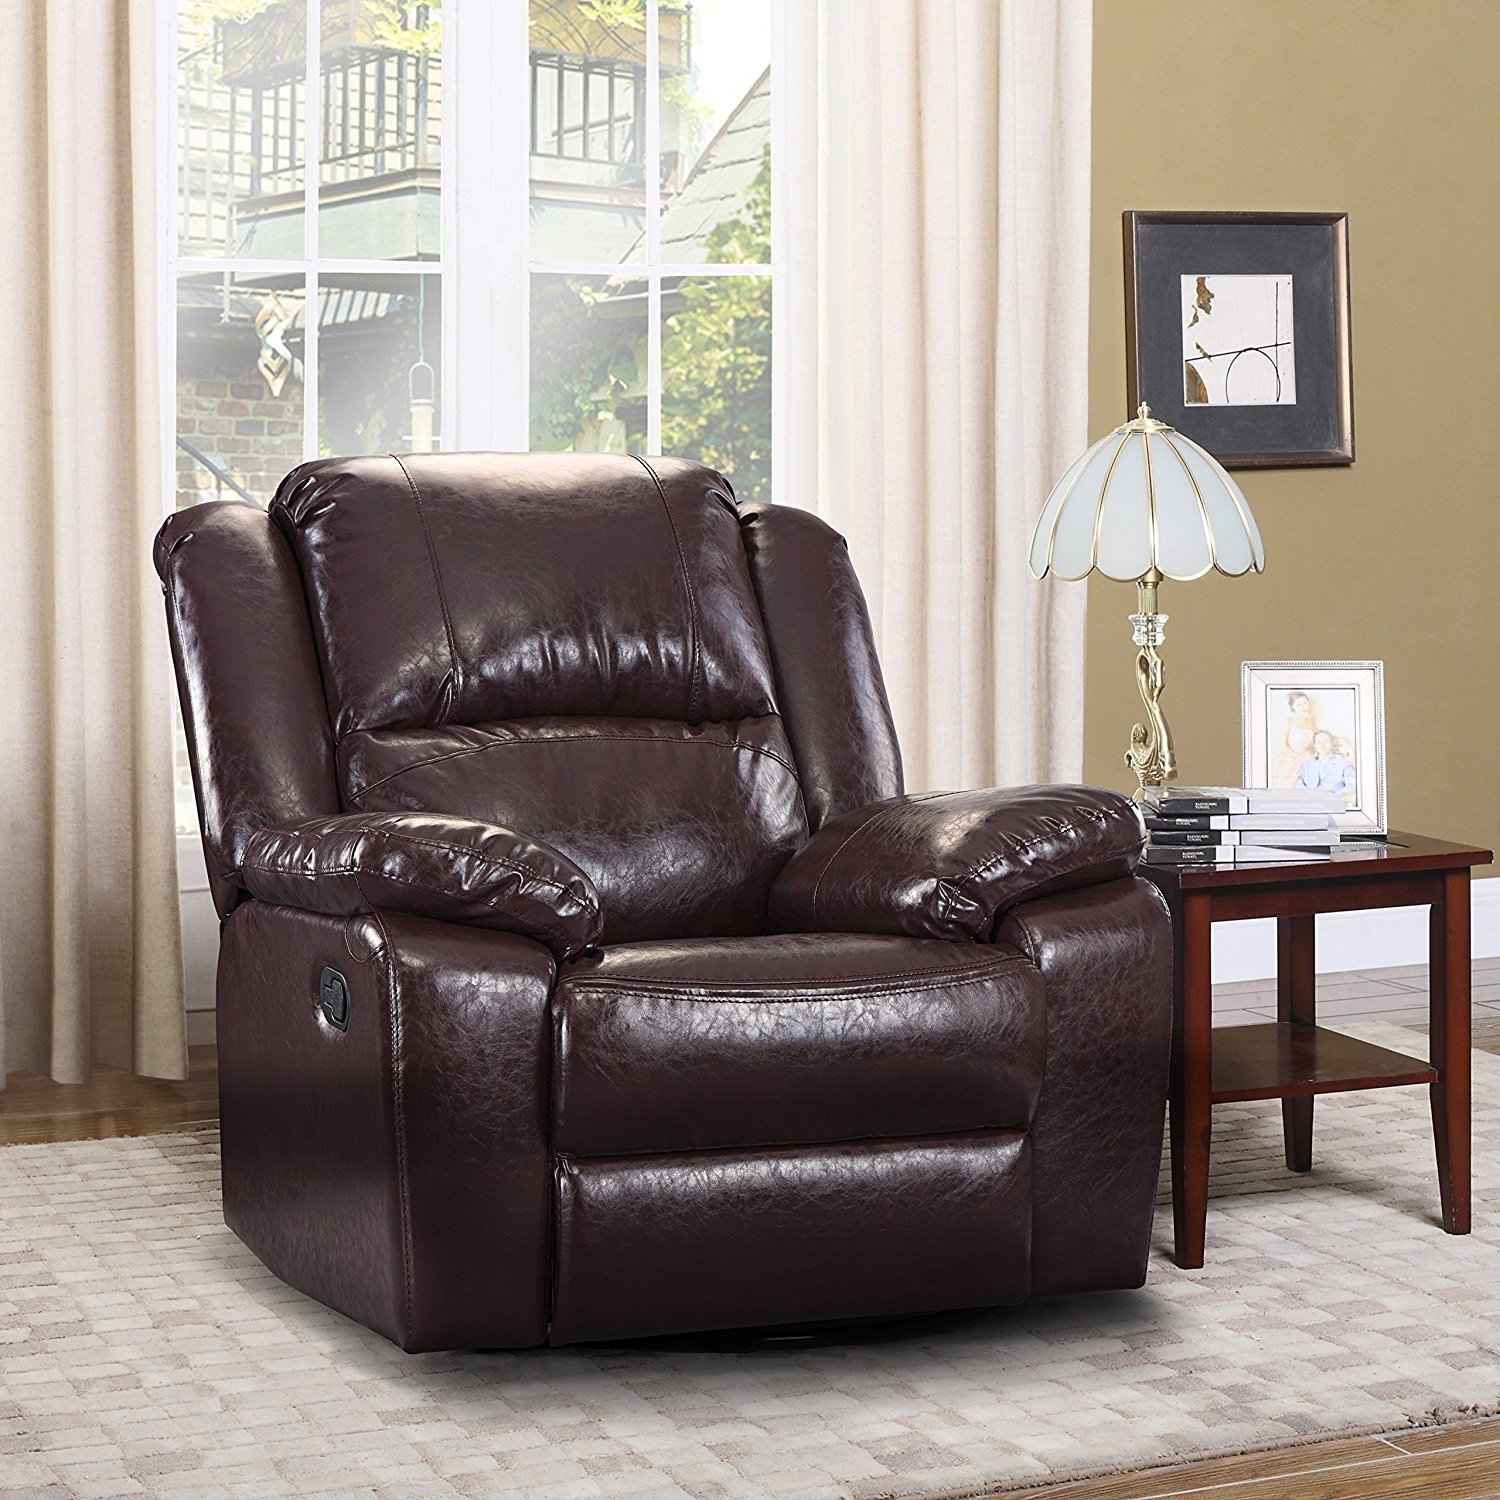 Oversize Reclining Chair Comfortable Bonded Leather Rocker